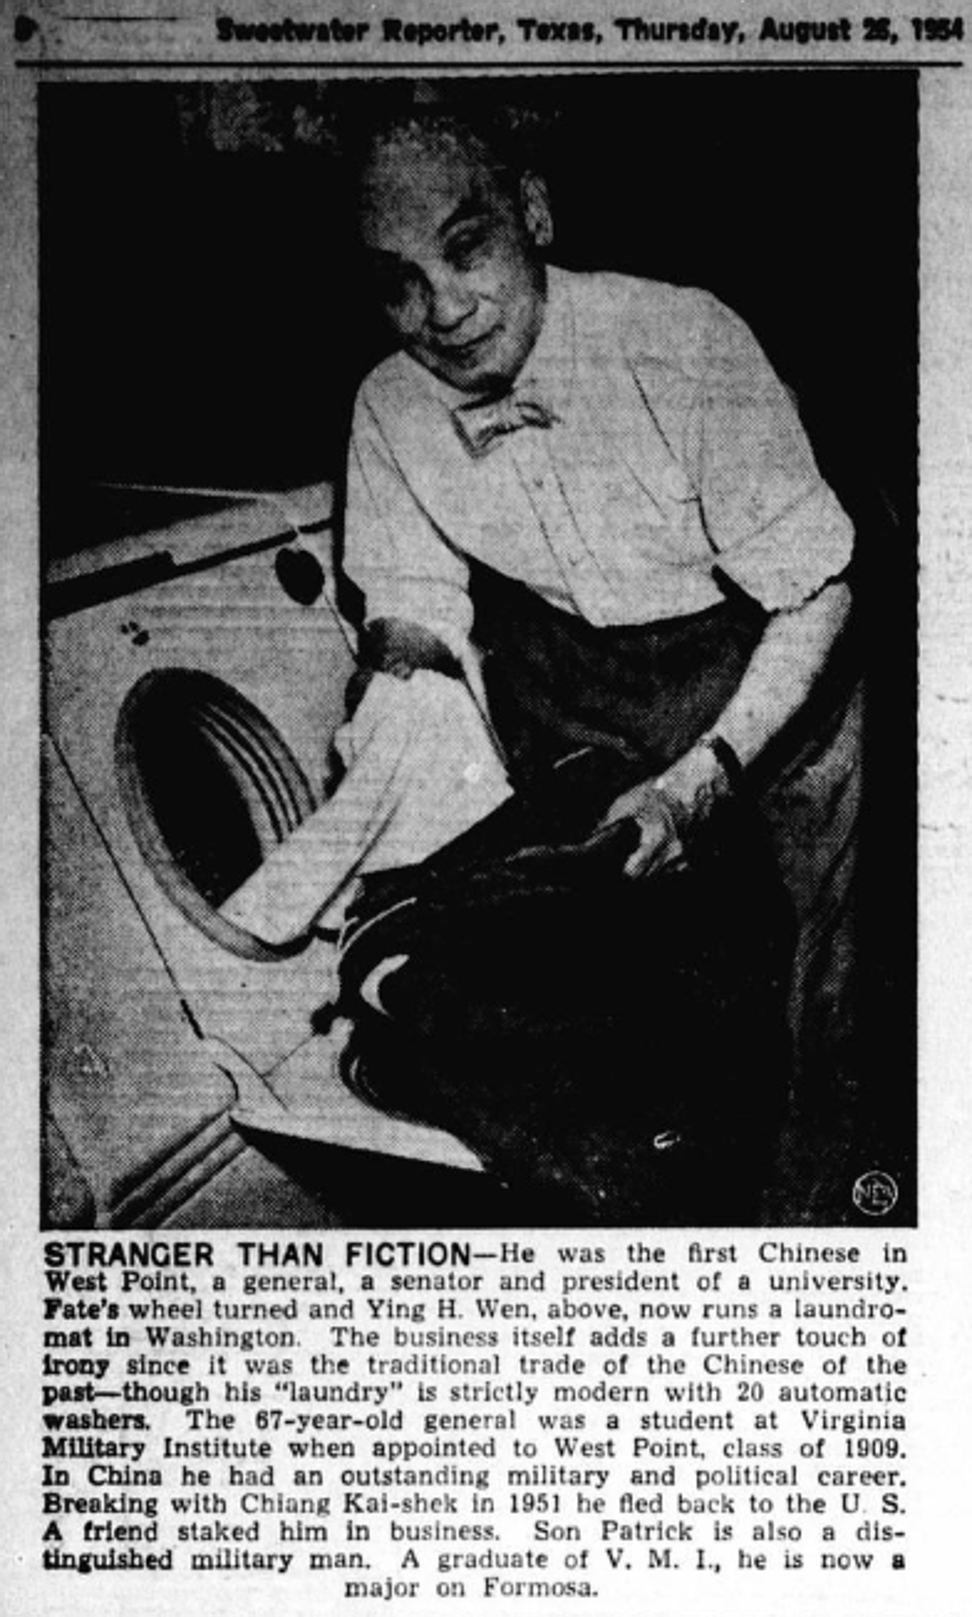 Ying Hsing Wen is seen in a clipping from the August 26, 1954 issue of the Sweetwater Reporter. Photo: Handout